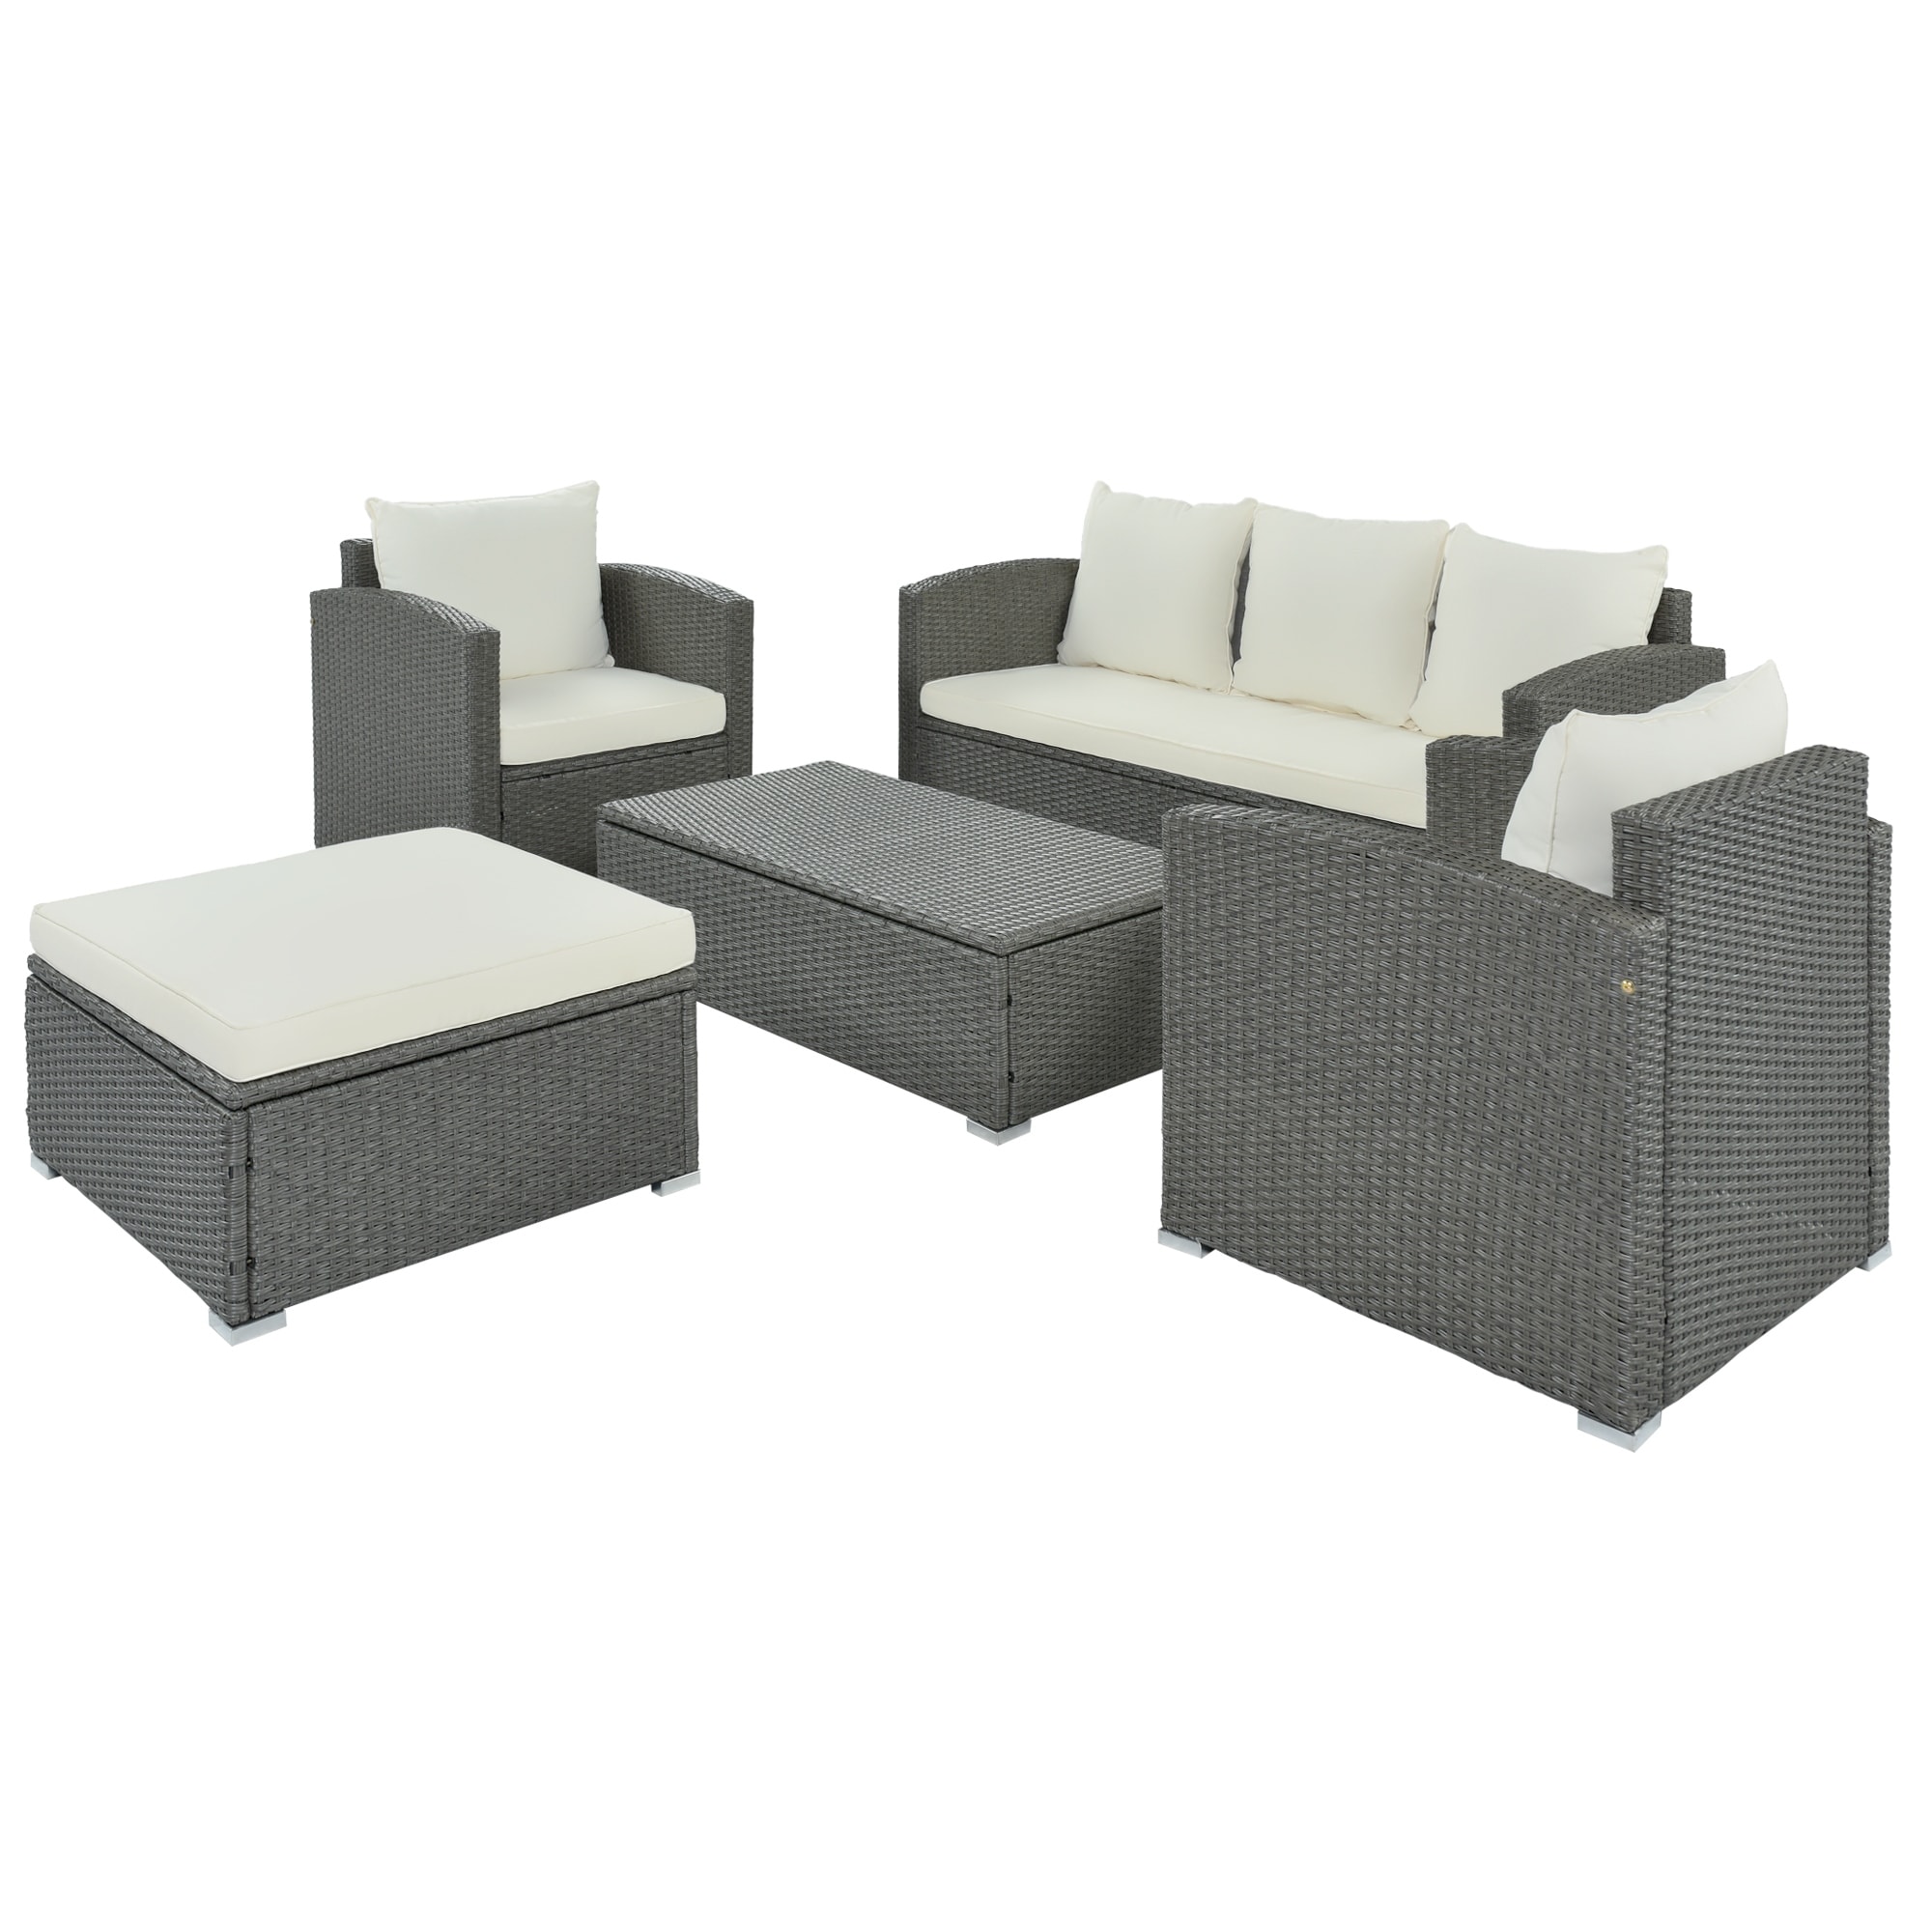 Outdoor Patio 5-piece All-weather Pe Wicker Rattan Sectional Sofa Set With Multifunctional Storage Table And Ottoman  Cushion